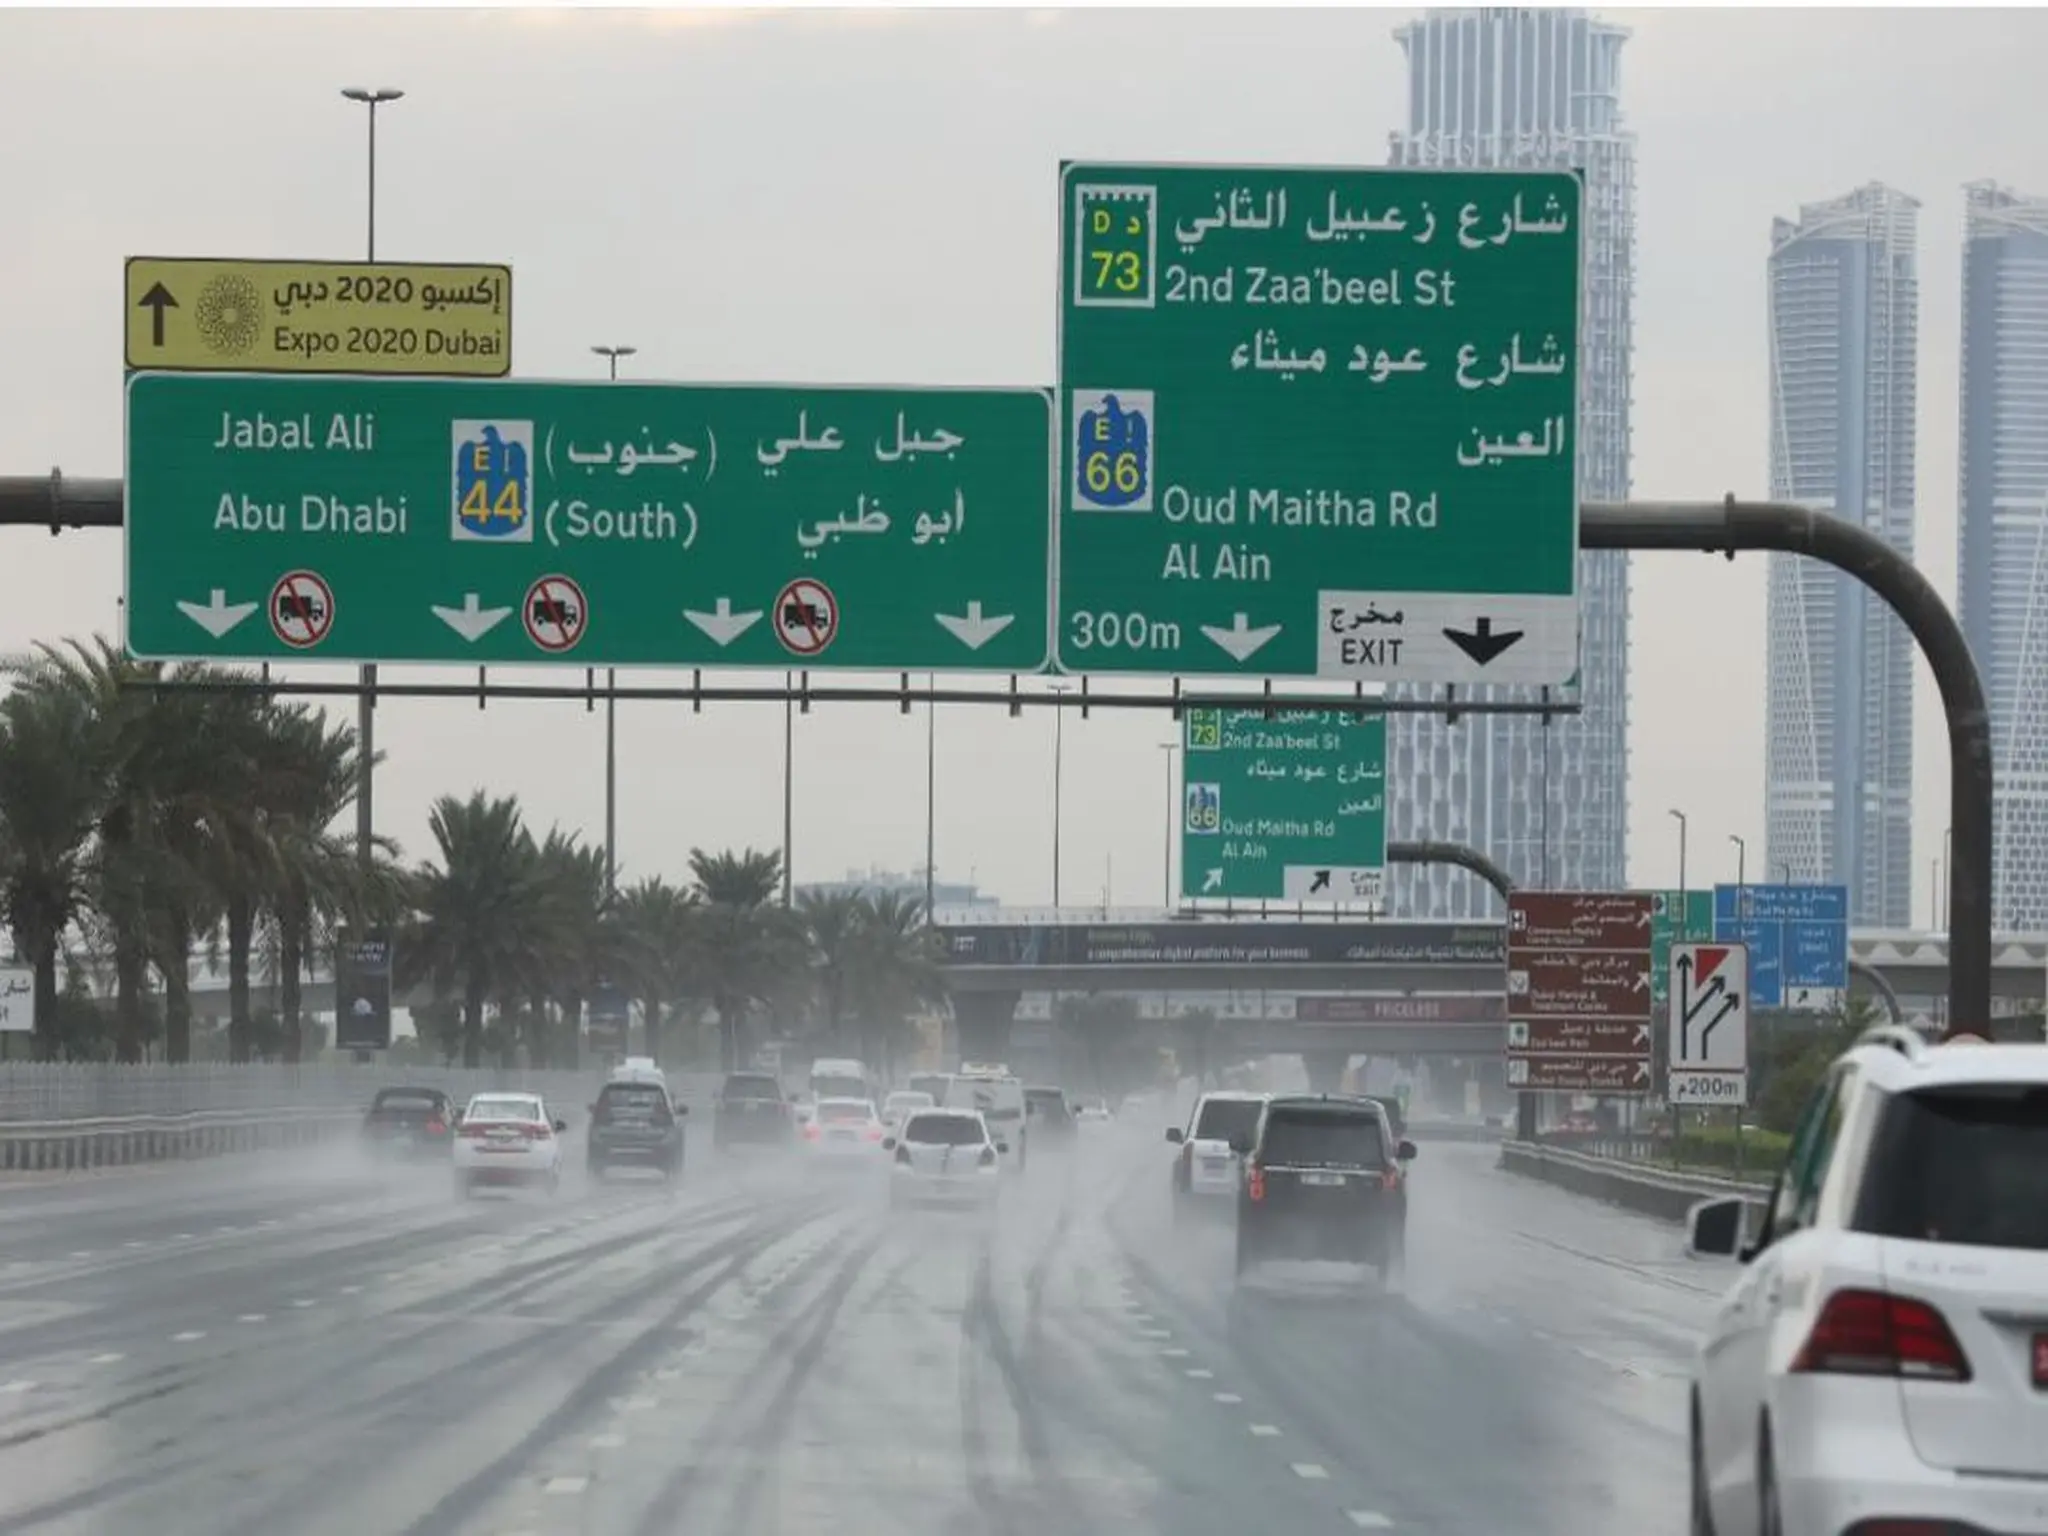 UAE Meteorology announces that the temperature will reach 4.2 on this date